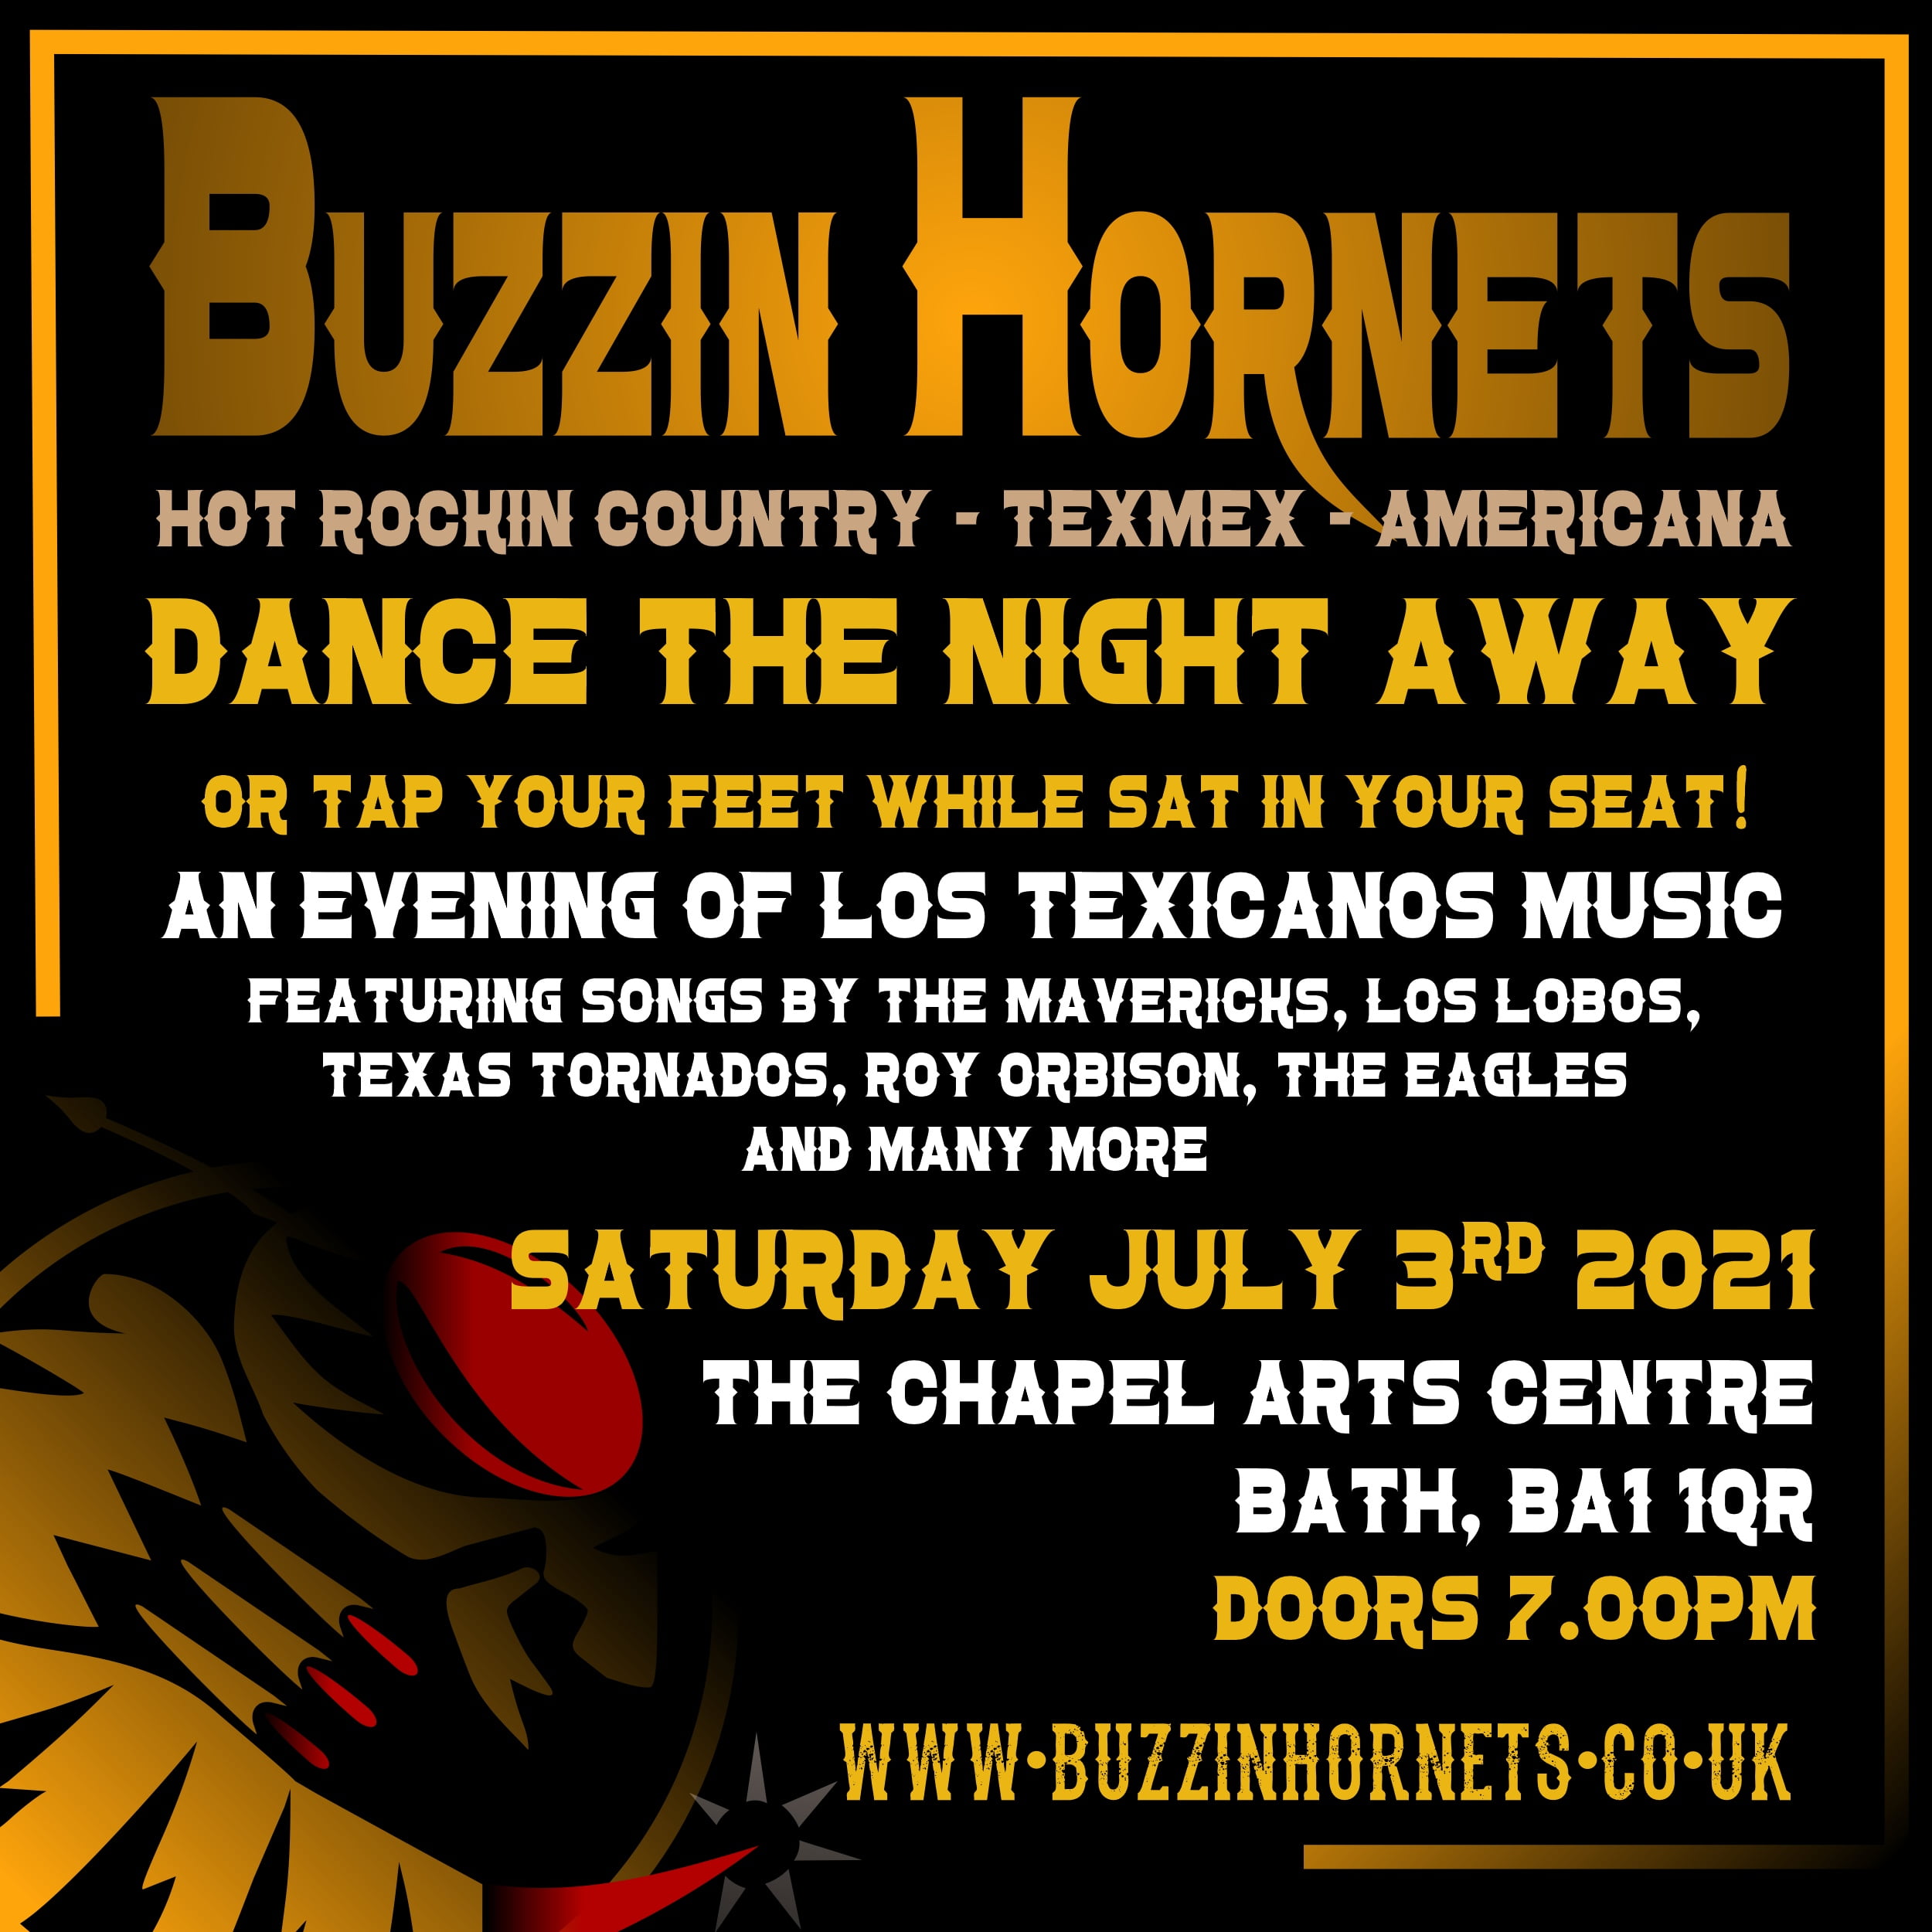 The Buzzin Hornets and the 'Los Texicanos  Show'